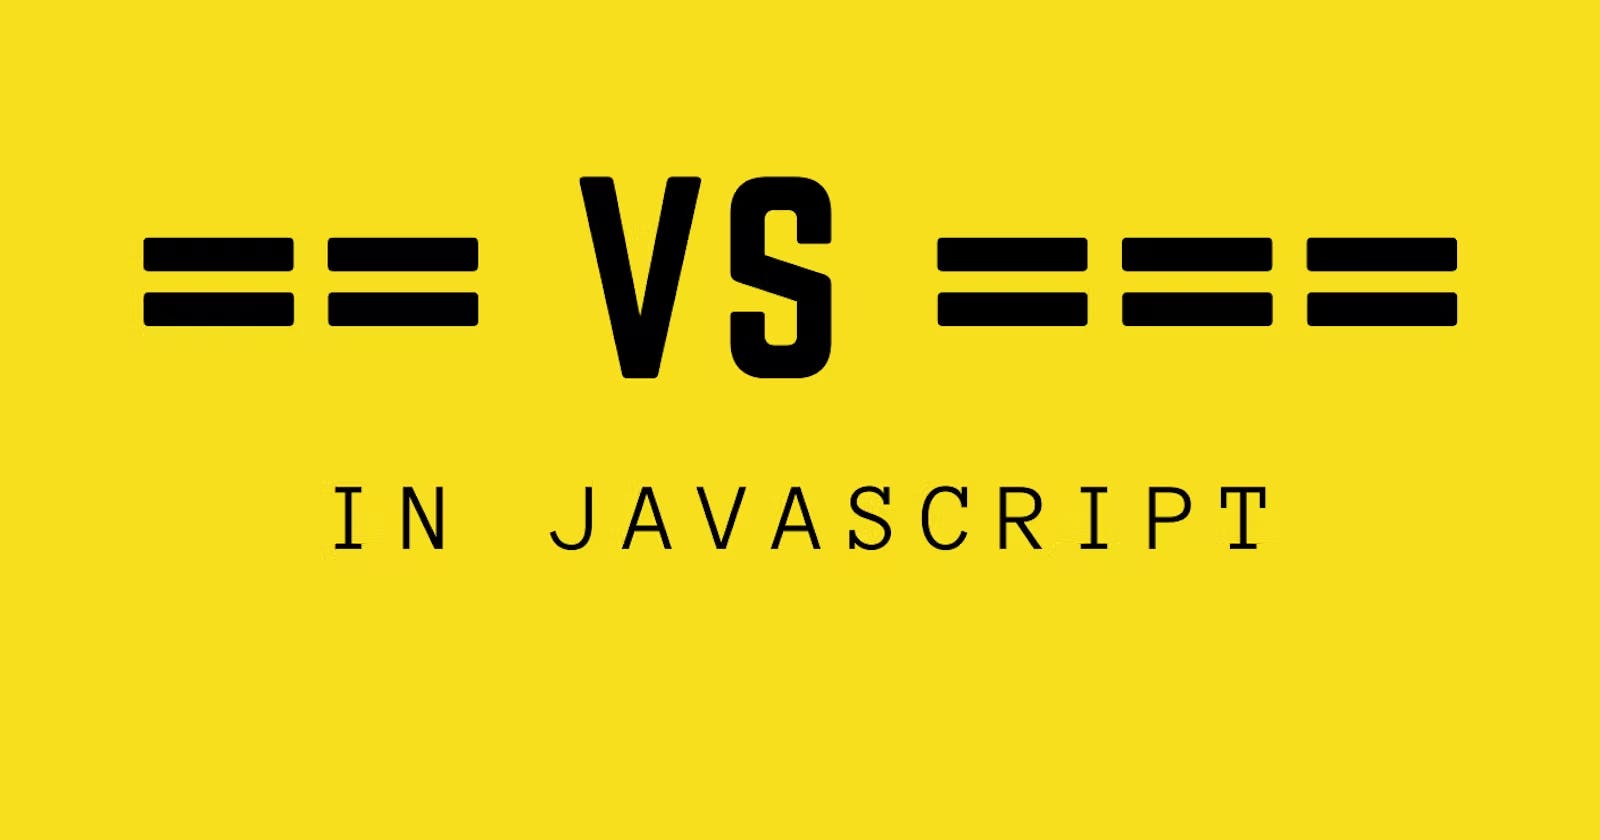 Loose Equality Vs Strict Equality in JavaScript